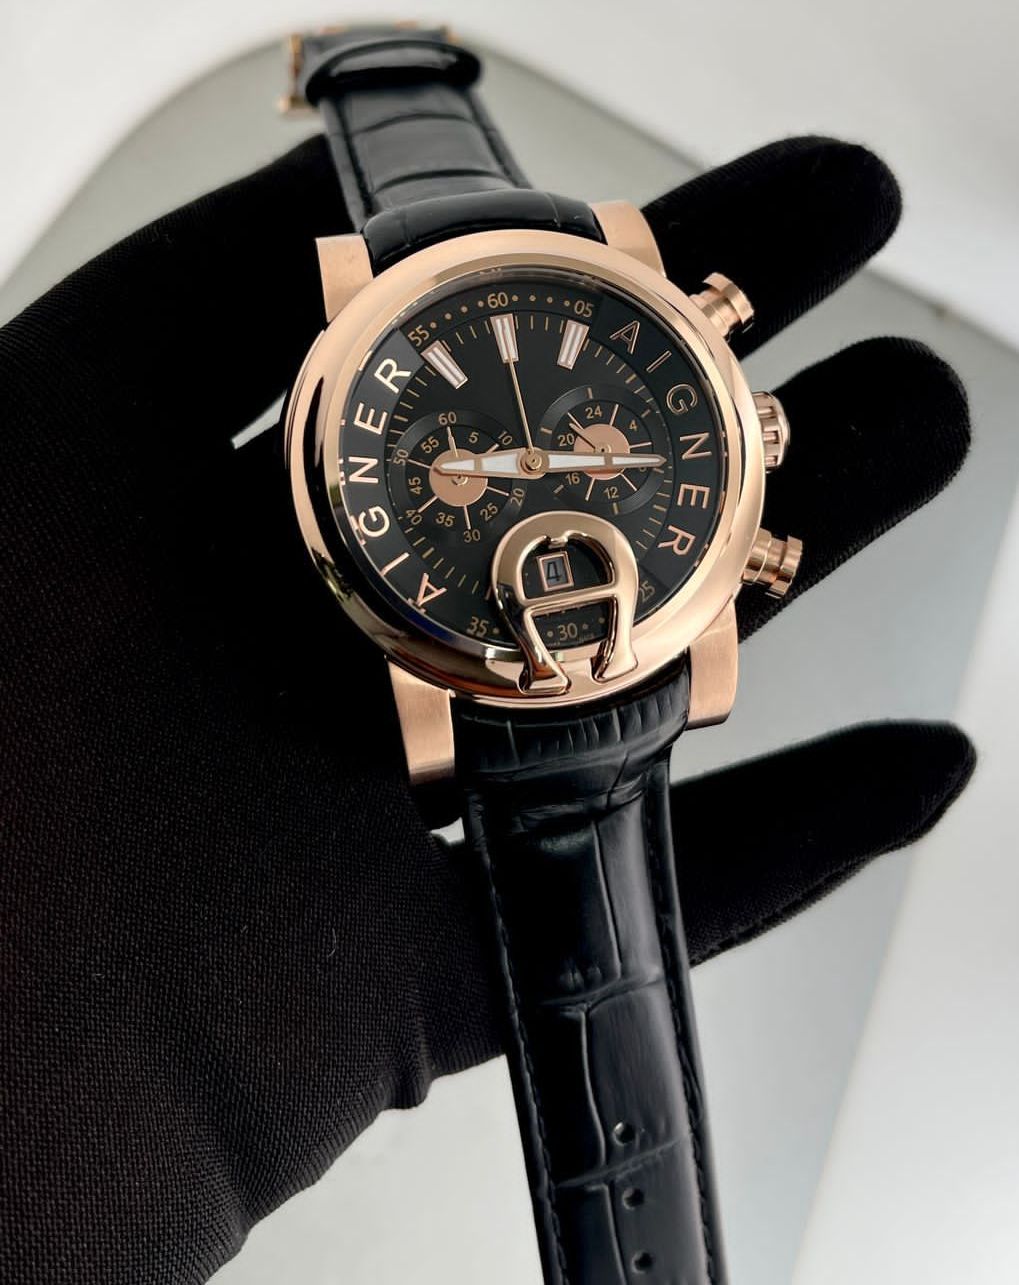 Etienne Aigner AG - Official Online Shop | Premium watches, Beautiful  watches, Watches